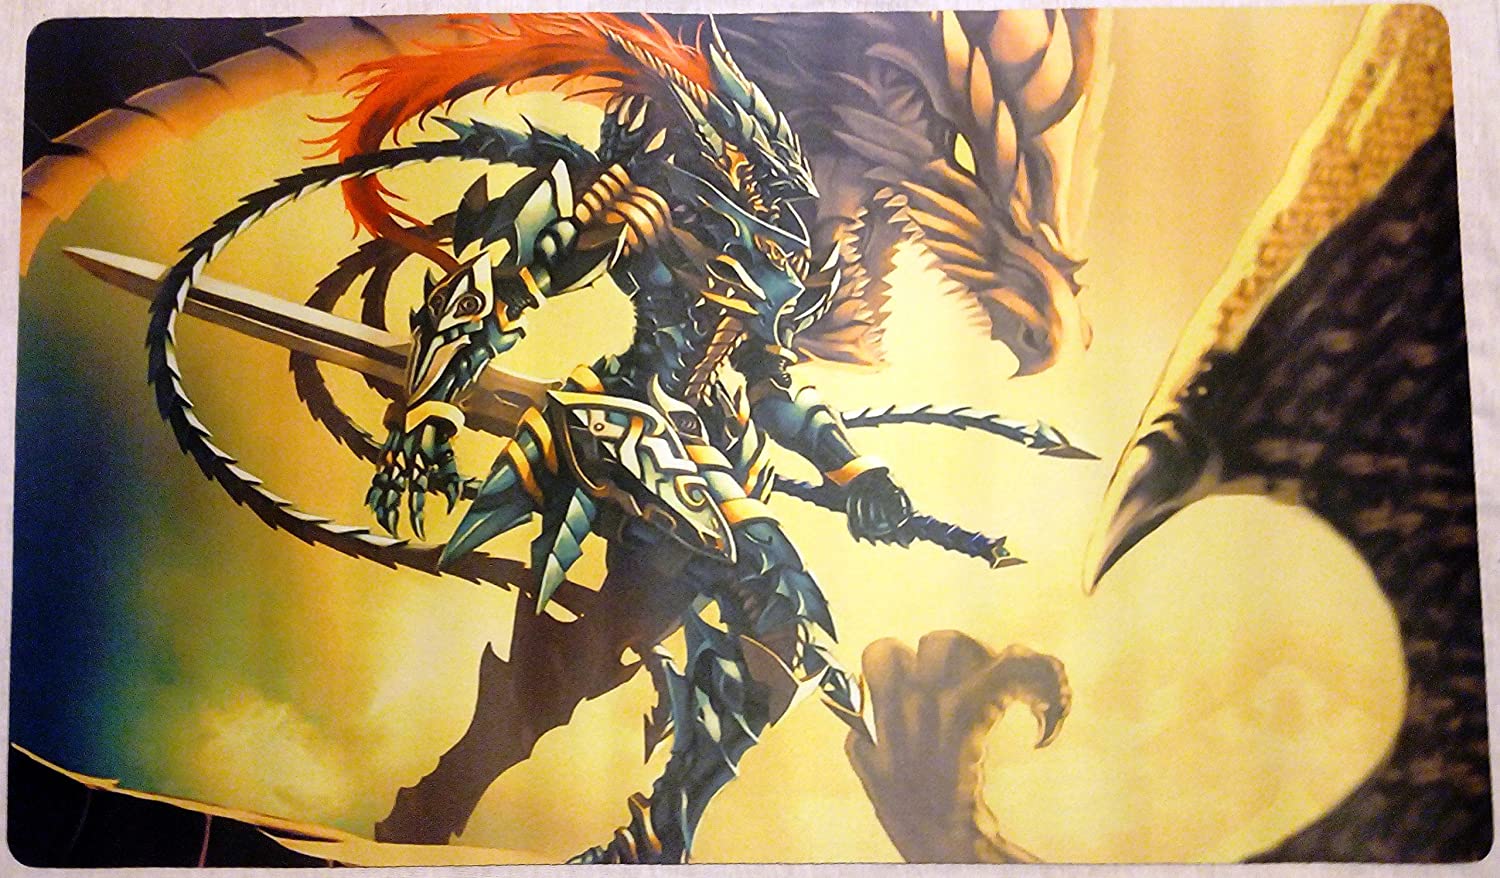 Black luster Soldier BLS yugioh TCG playmat, gamemat 24 wide 14 tall for trading card game smooth cloth surface rubber base, Counters, Playmats & Gameplay Accessories